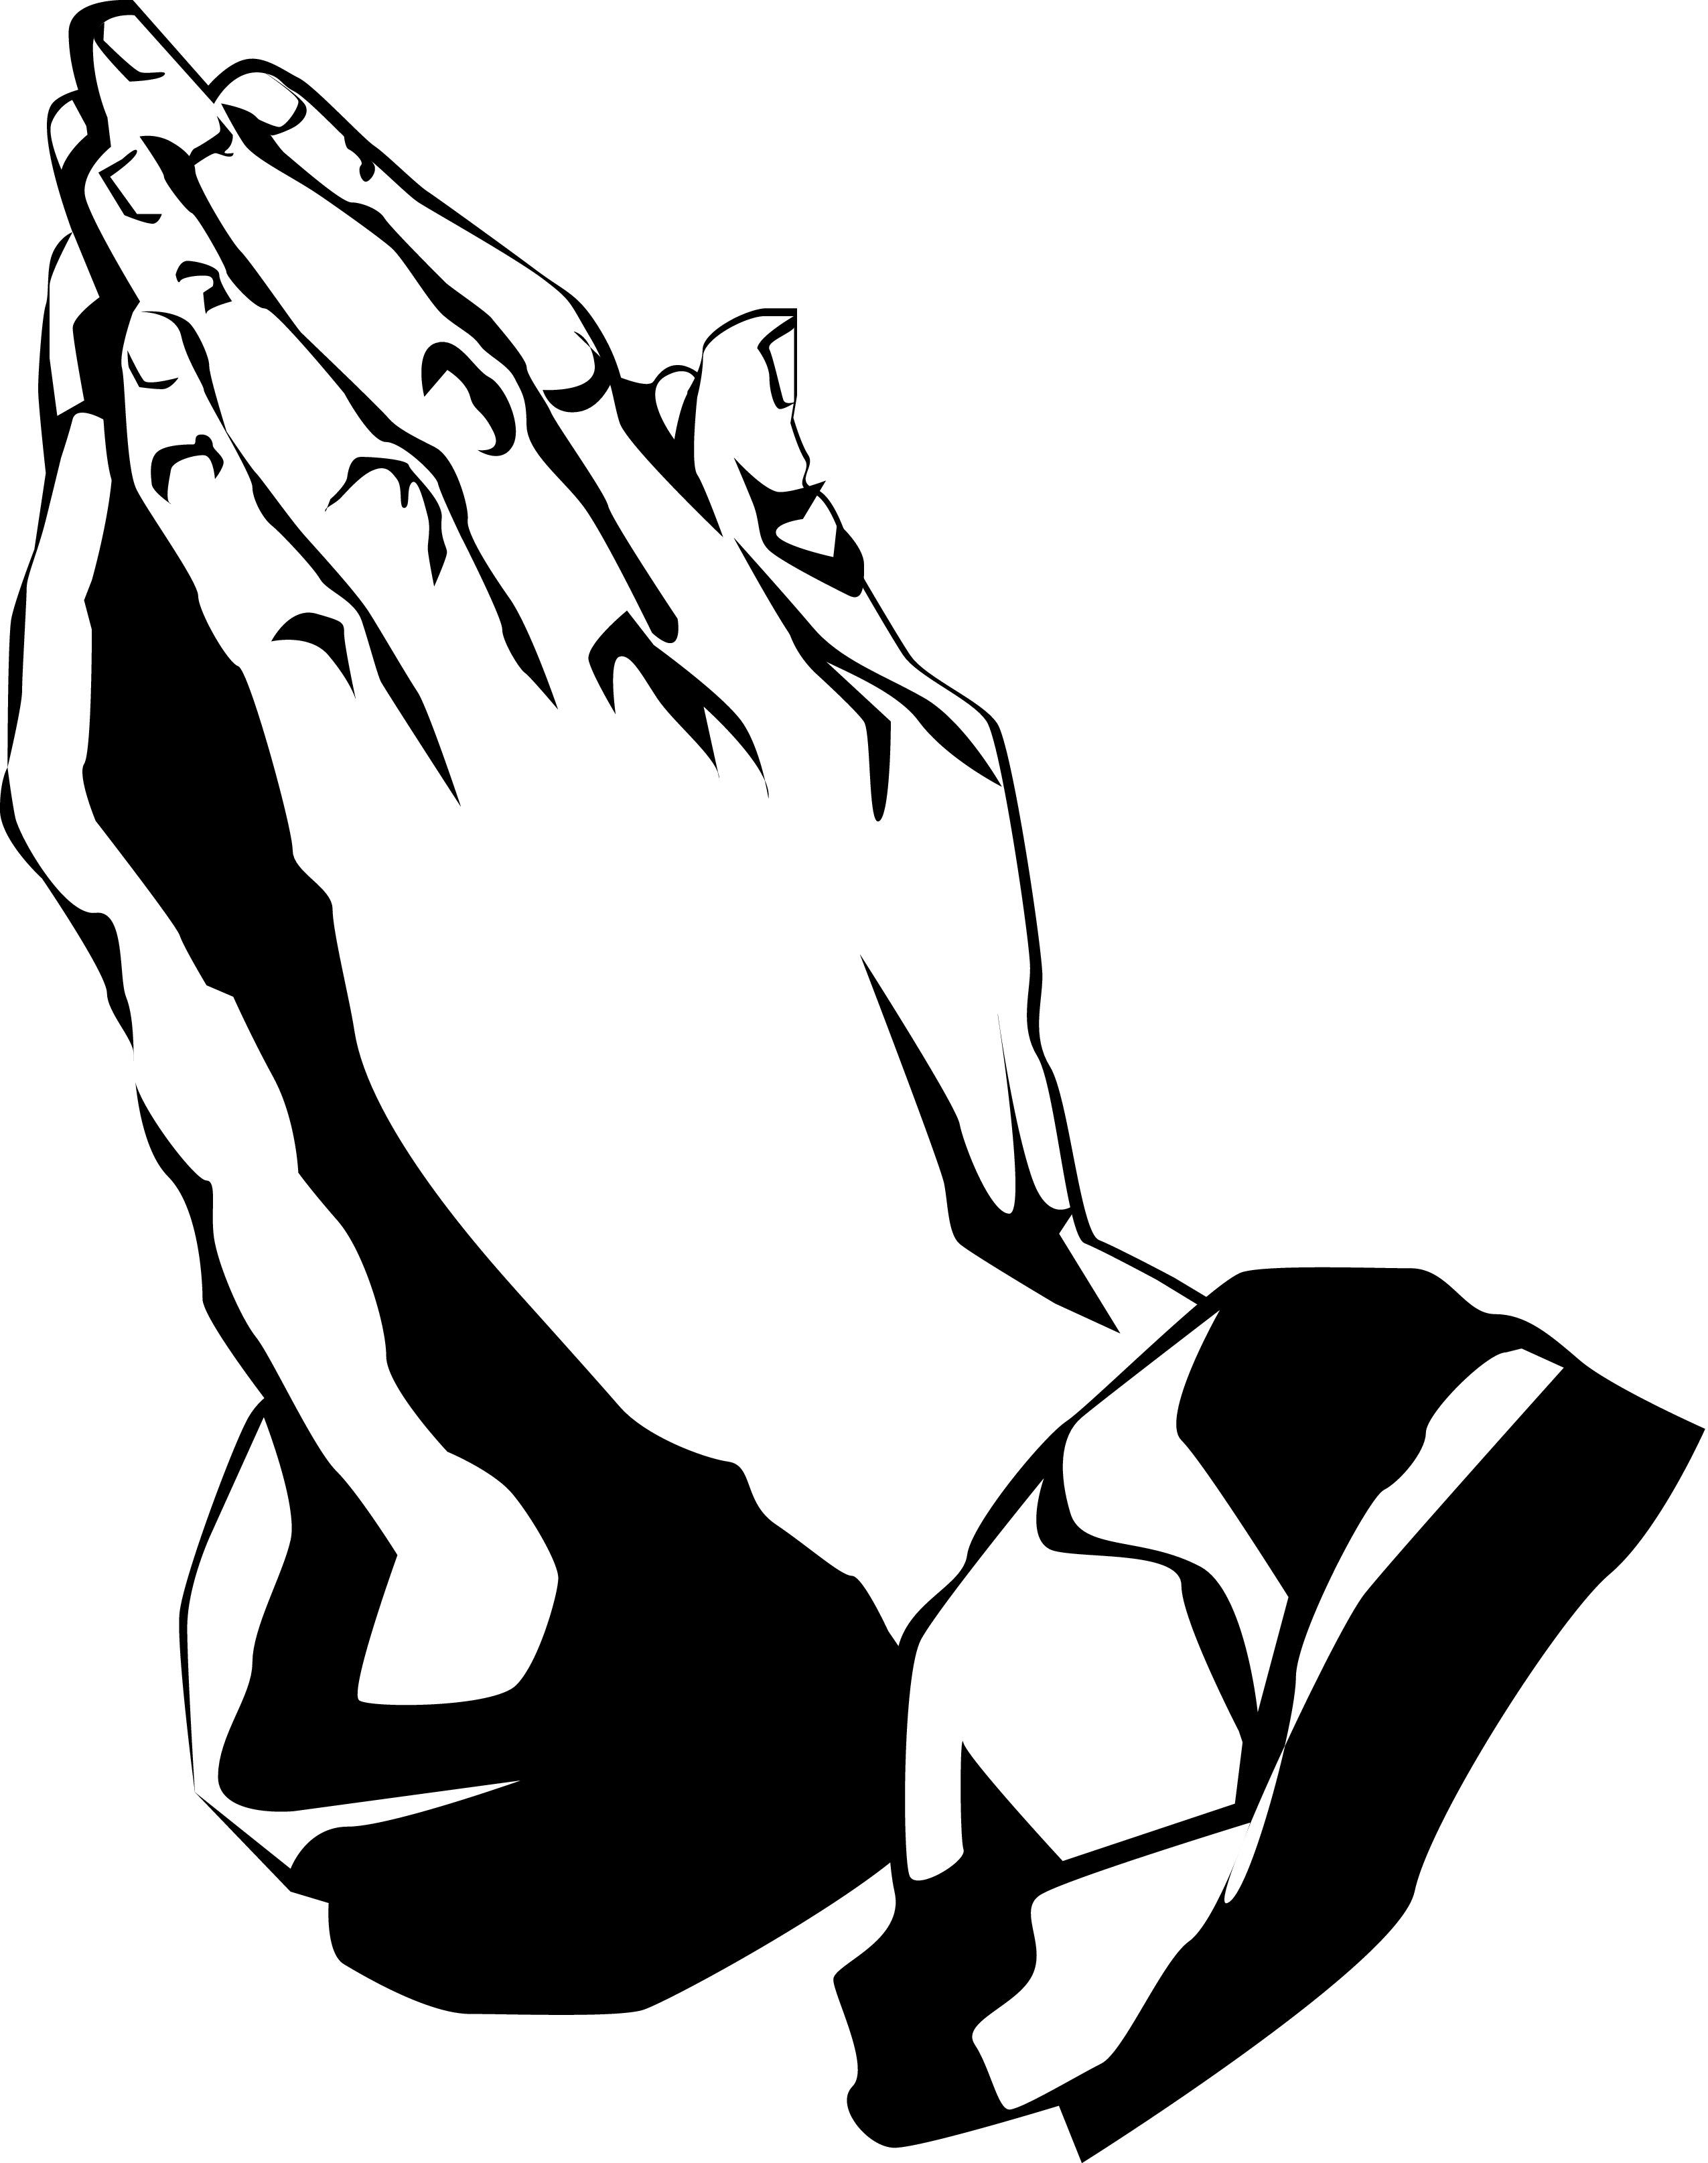 Free prayer hand clipart the cliparts 2